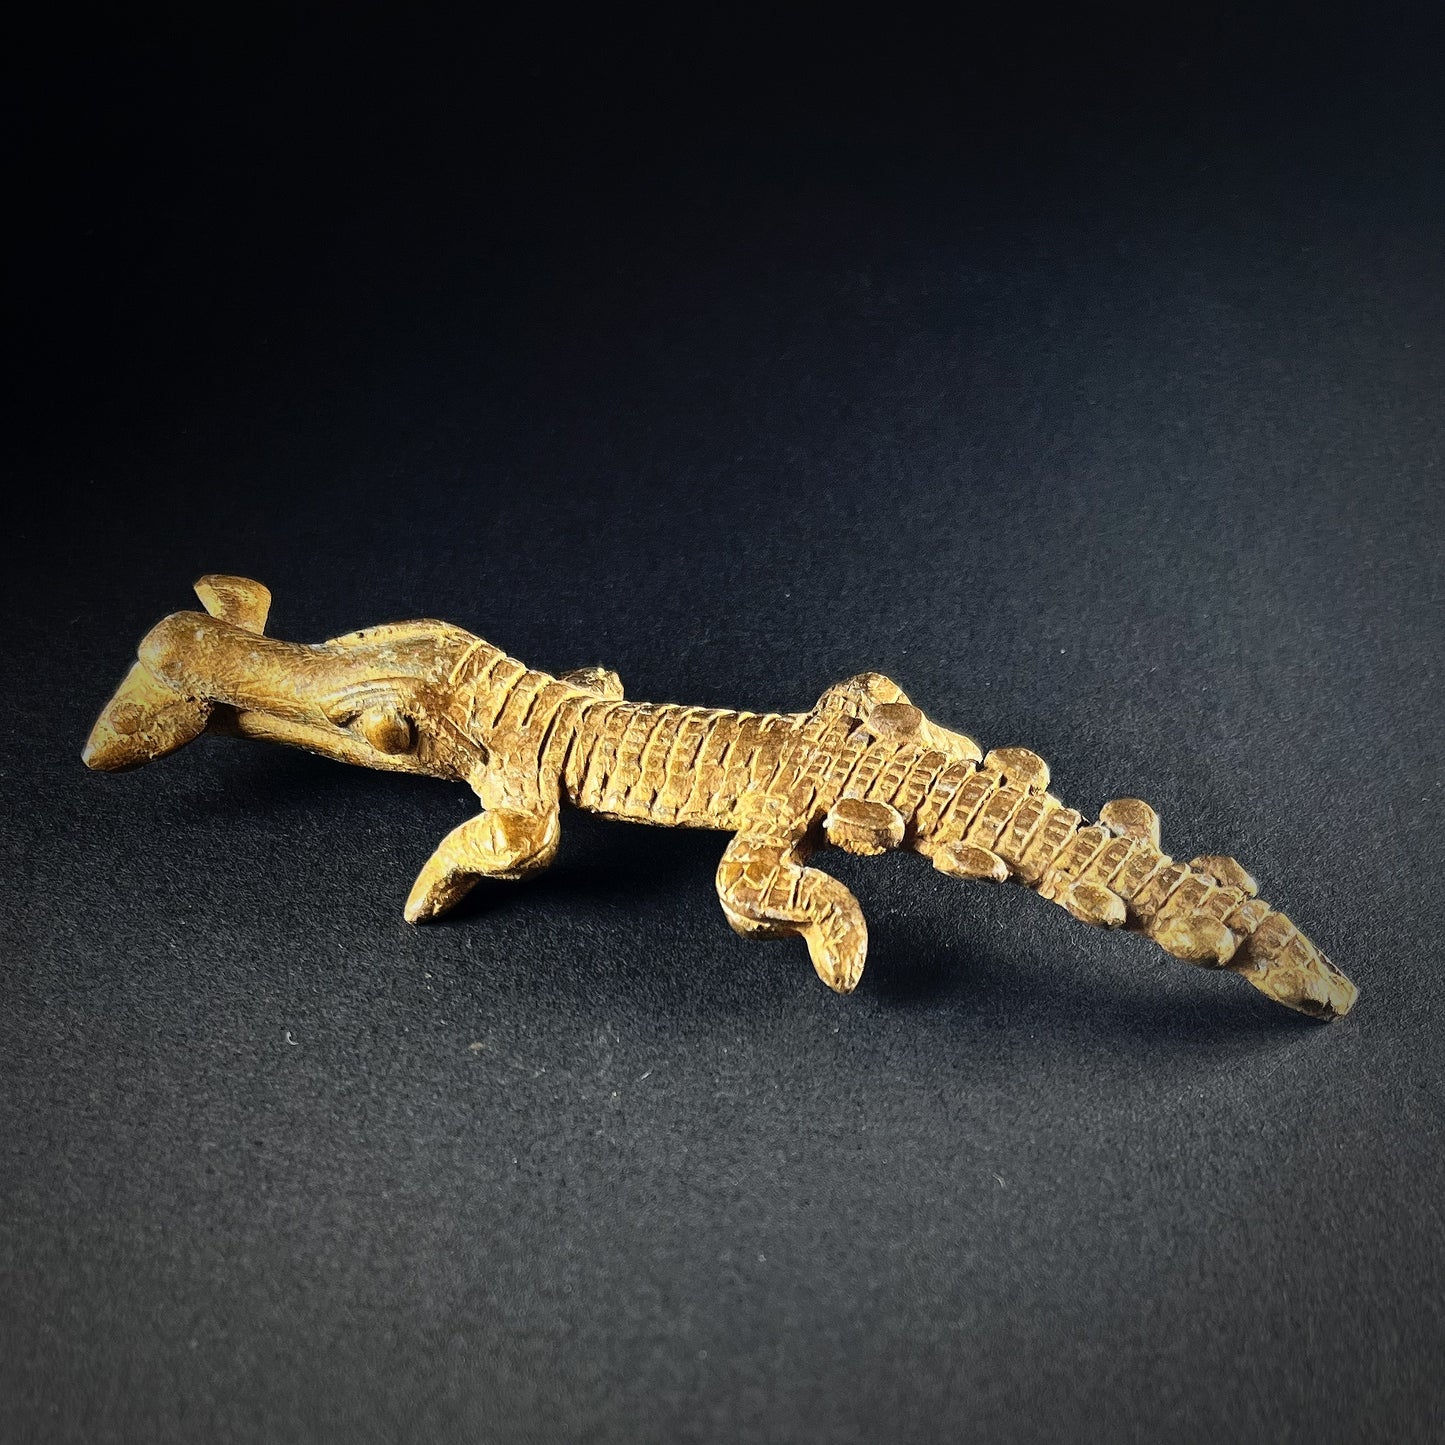 Crocodile amulet made out of bronze. Crocodile has a fish in its mouth. Origin Lobi people in Africa.